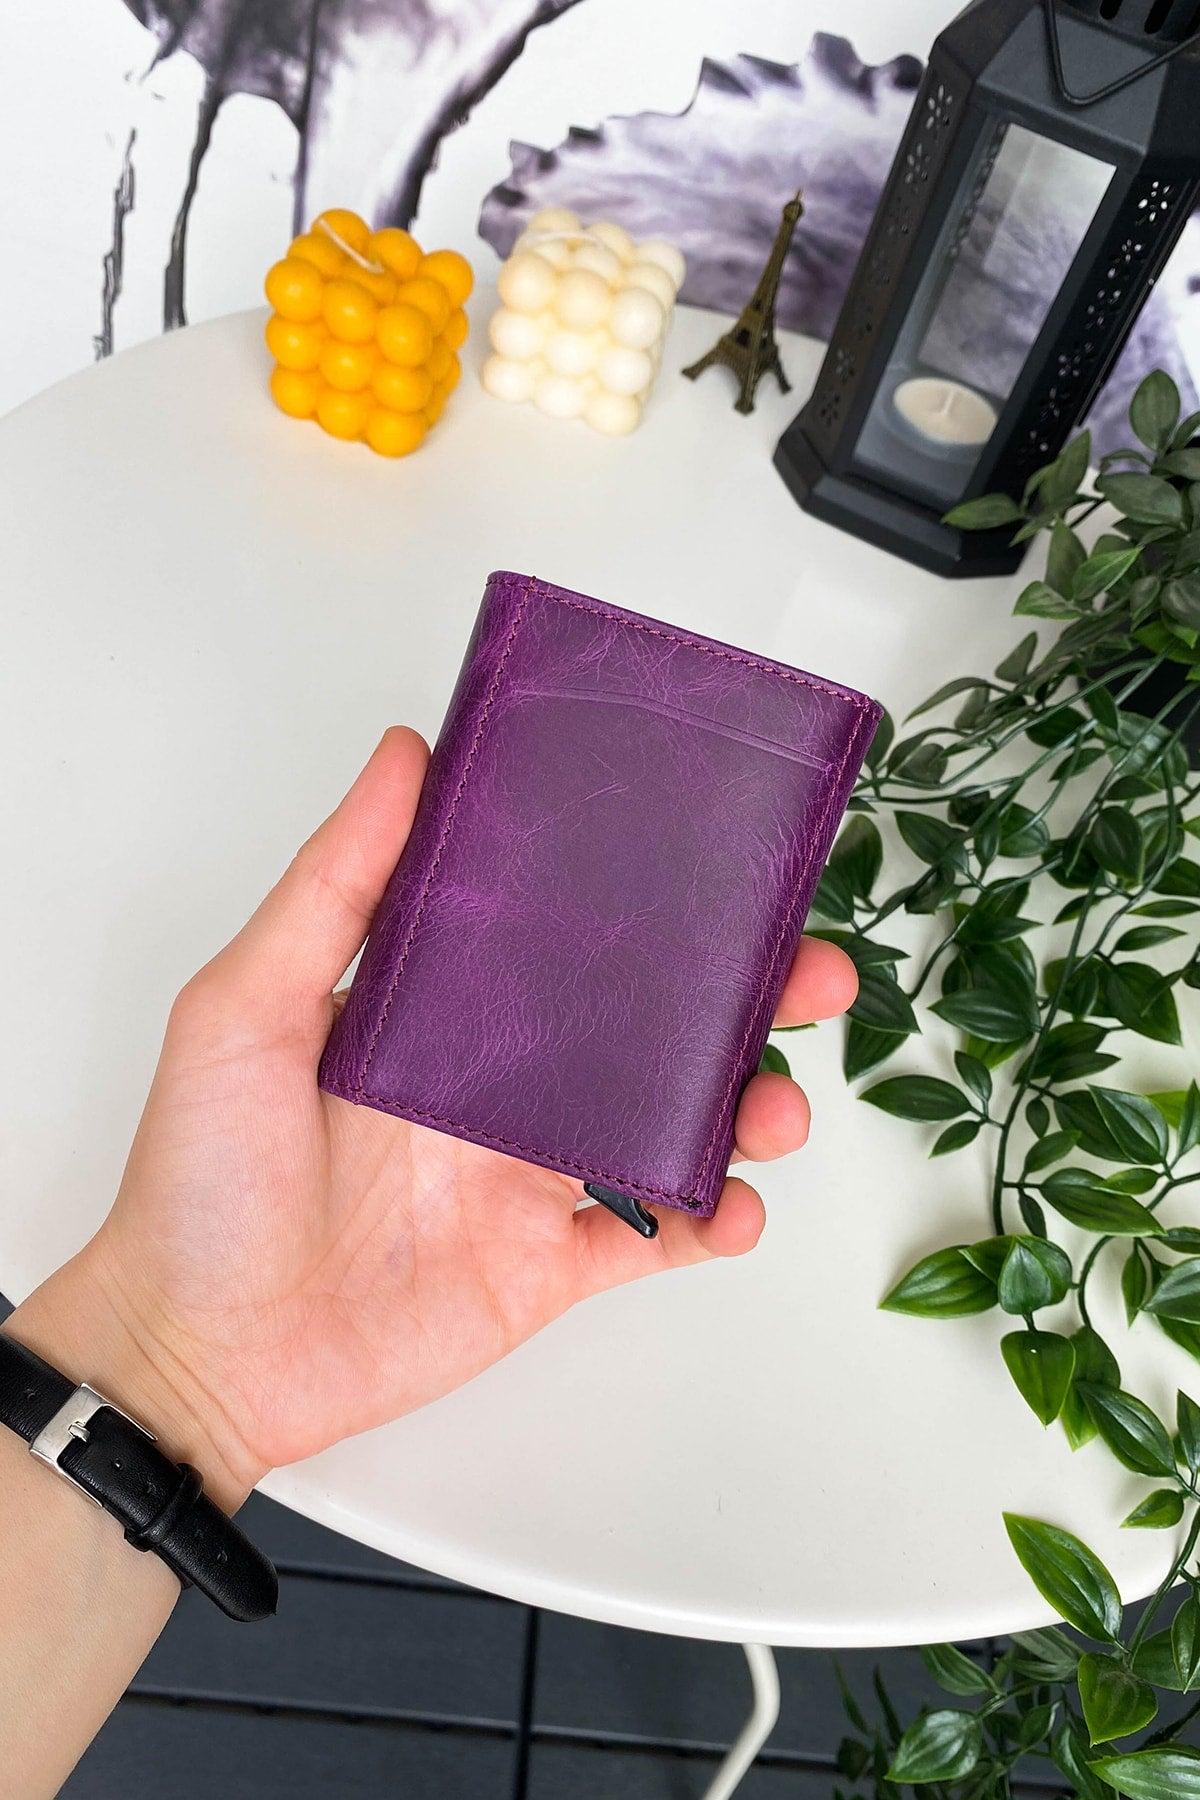 Pescol - Genuine Leather Purple Smart Card Holder / Wallet with Rfid Protection Mechanism, Top Level Craftsmanship